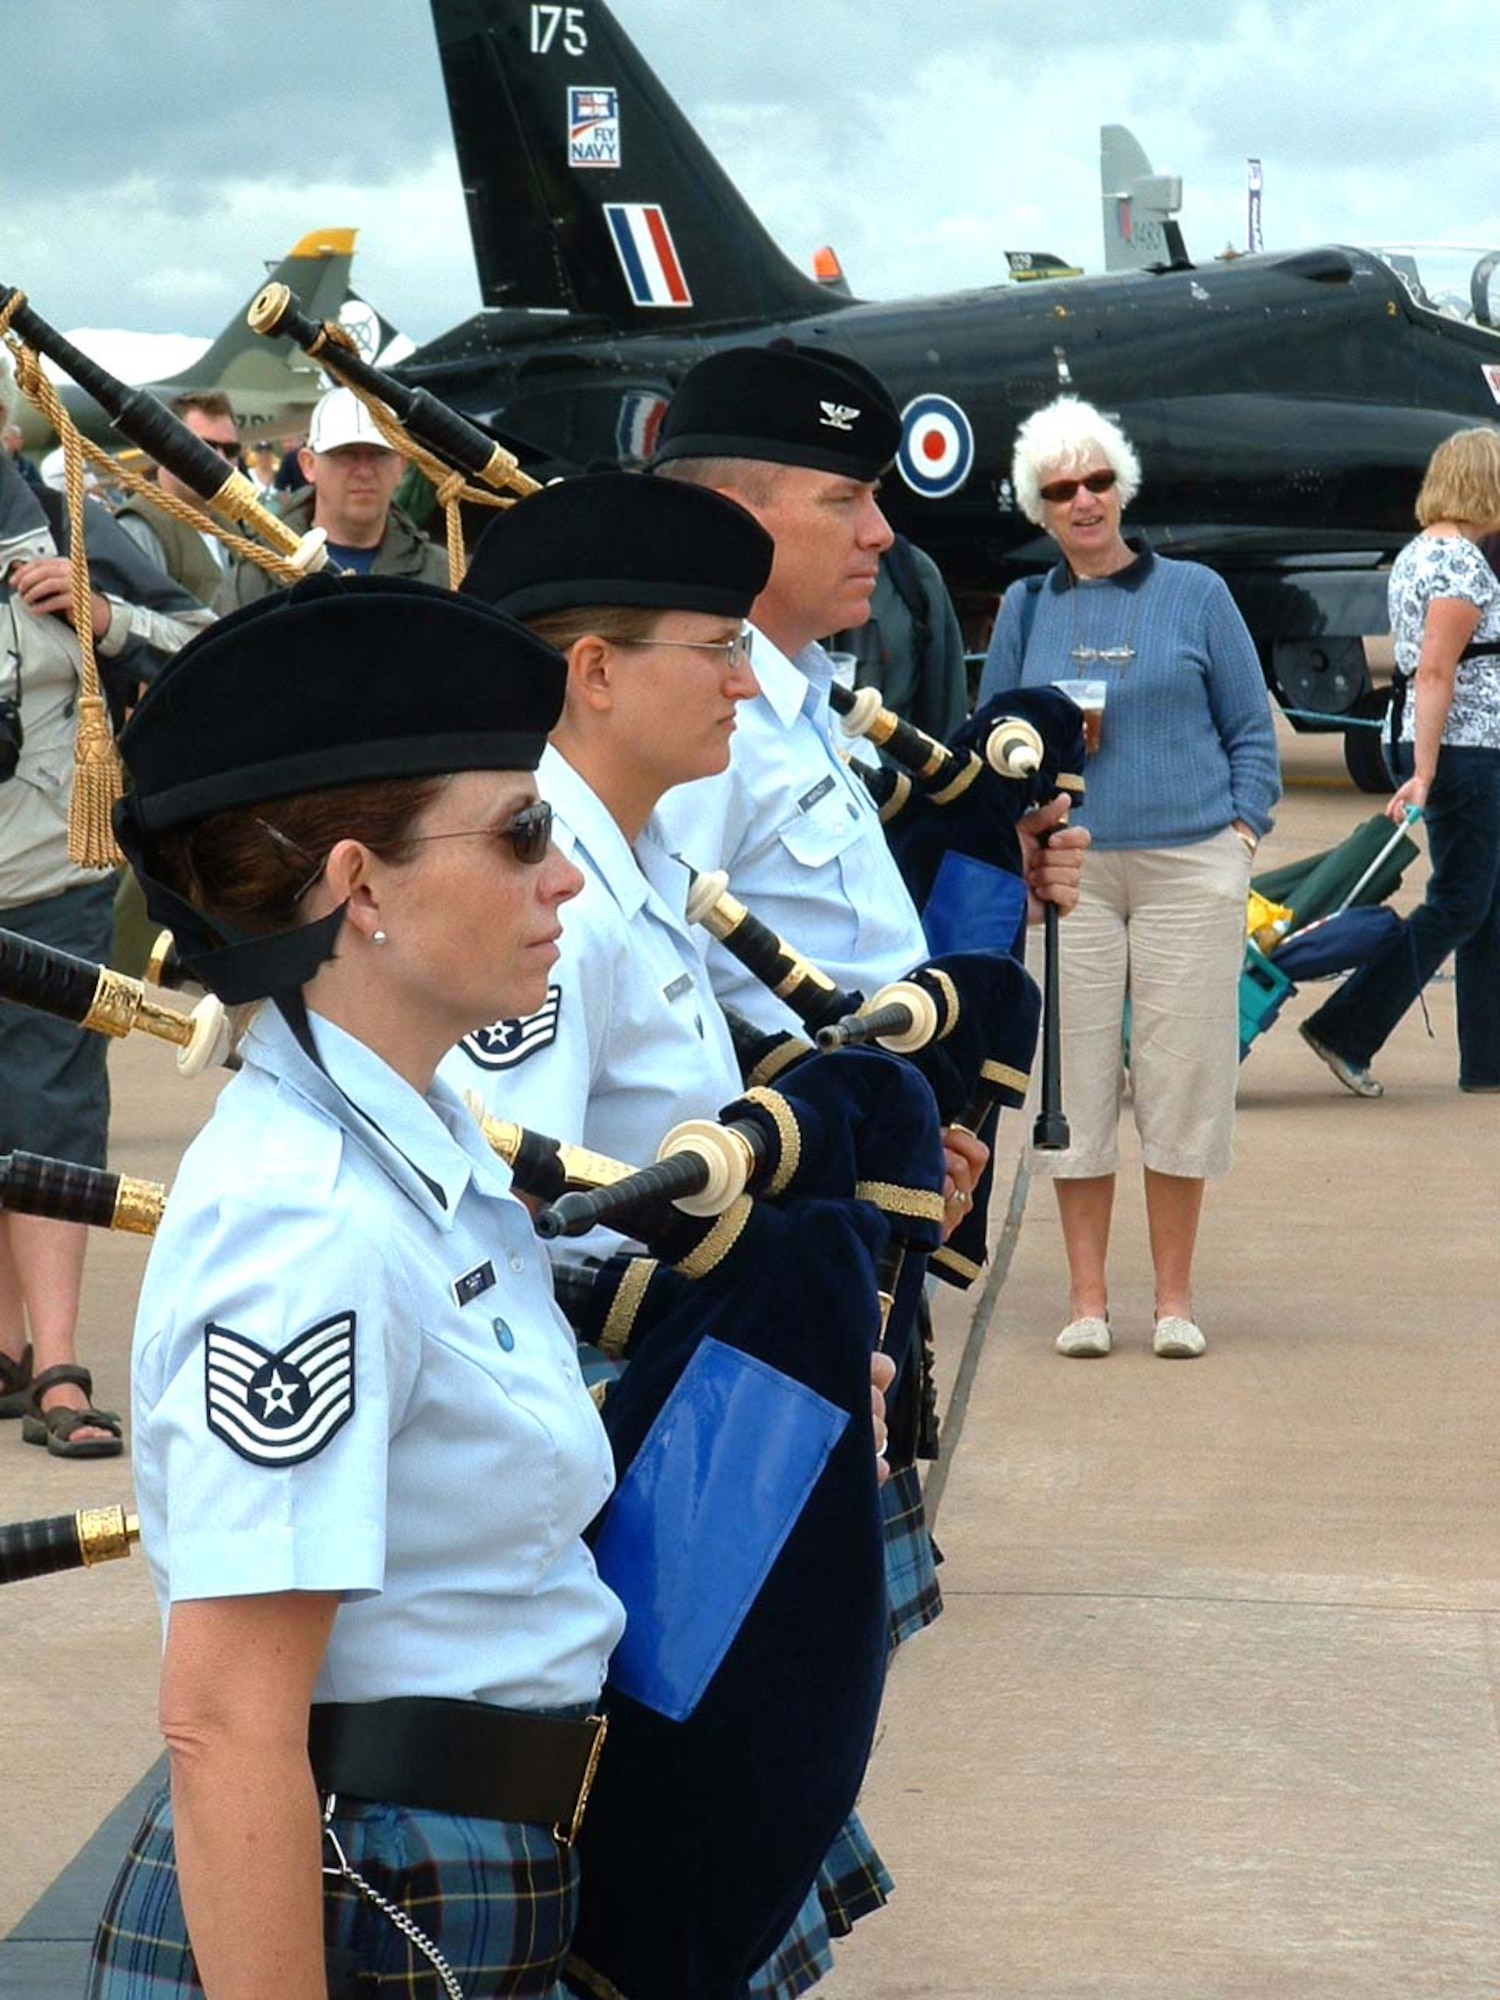 FAIRFORD, United Kingdom -- (From left) Tech. Sgt. Janis Thrift, Tech. Sgt. Kara Frank and Col. William McKinley, bagpipers with the band of the U.S. Air Force Reserve, prepare to perform for the more than 200,000 spectators attending the Royal International Air Tattoo at Royal Air Force Base Fairford.  (U.S. Air Force photo/Staff Sgt. Eric Frank)